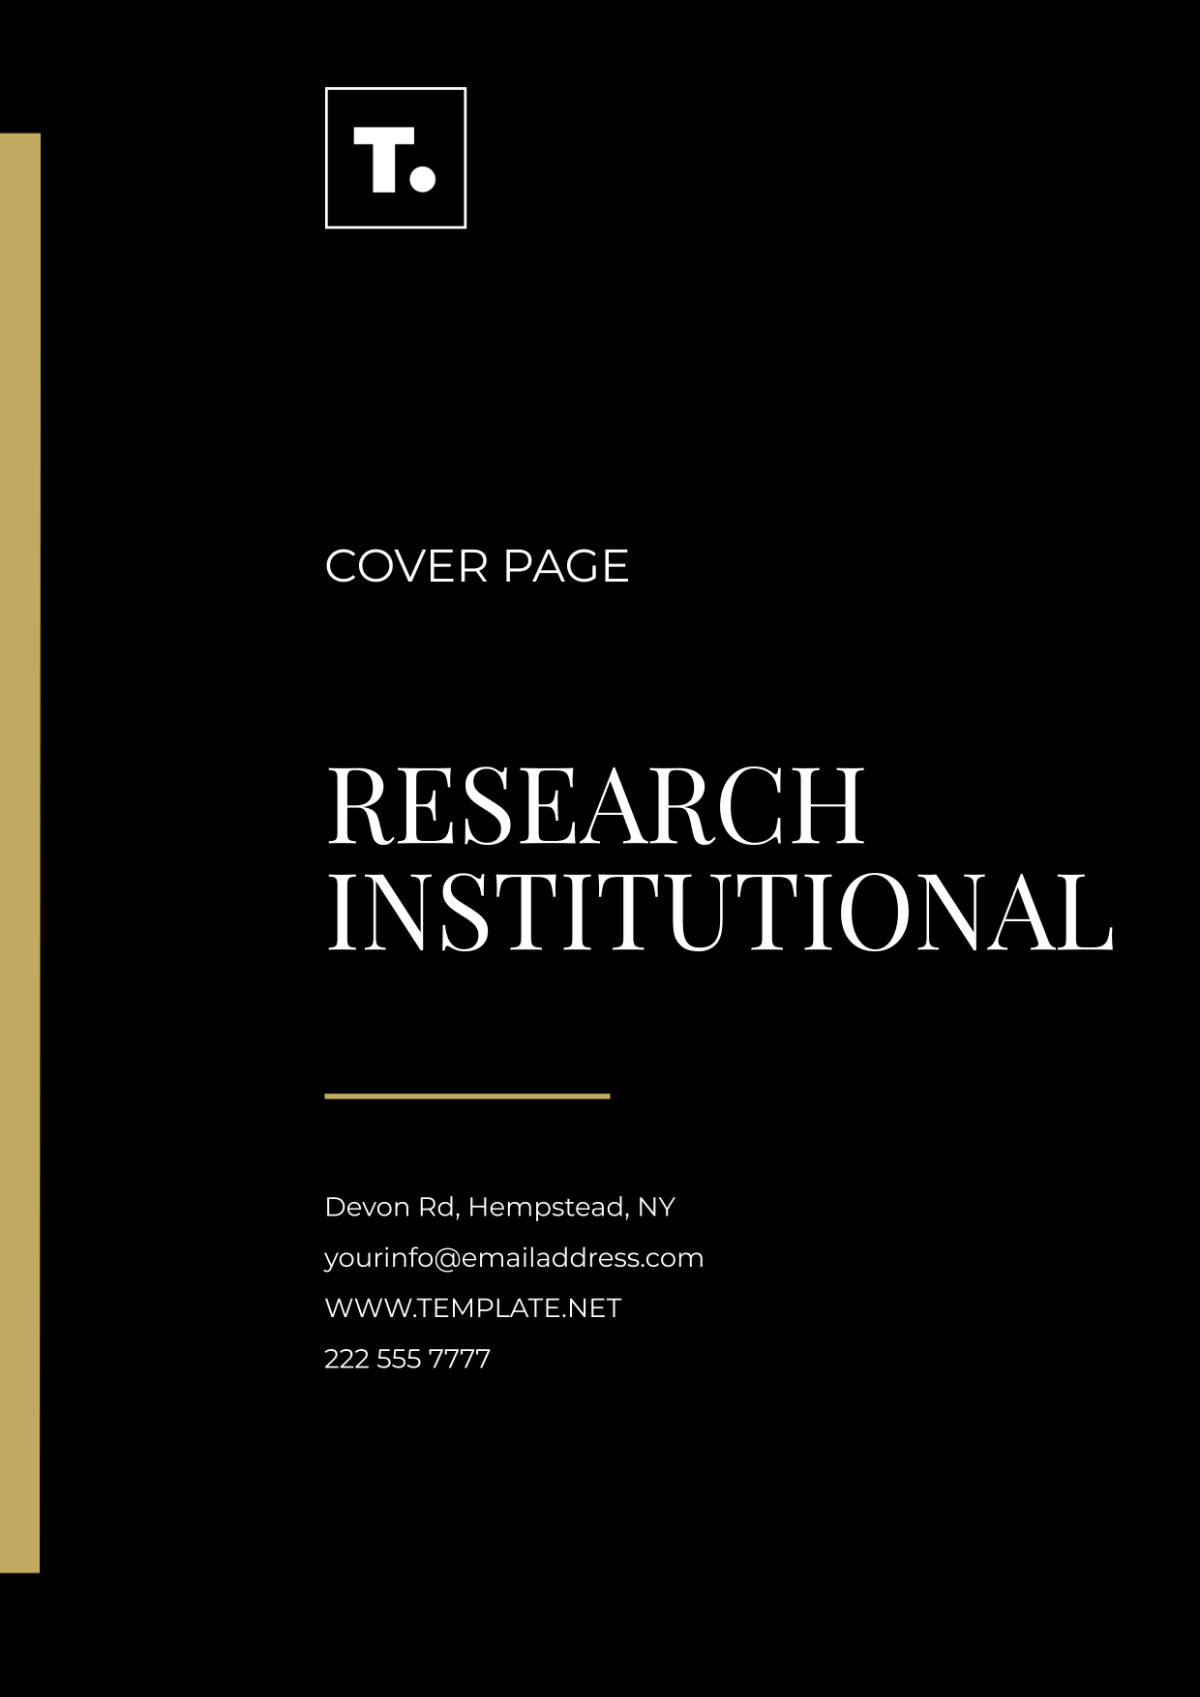 Research Institutional Cover Page